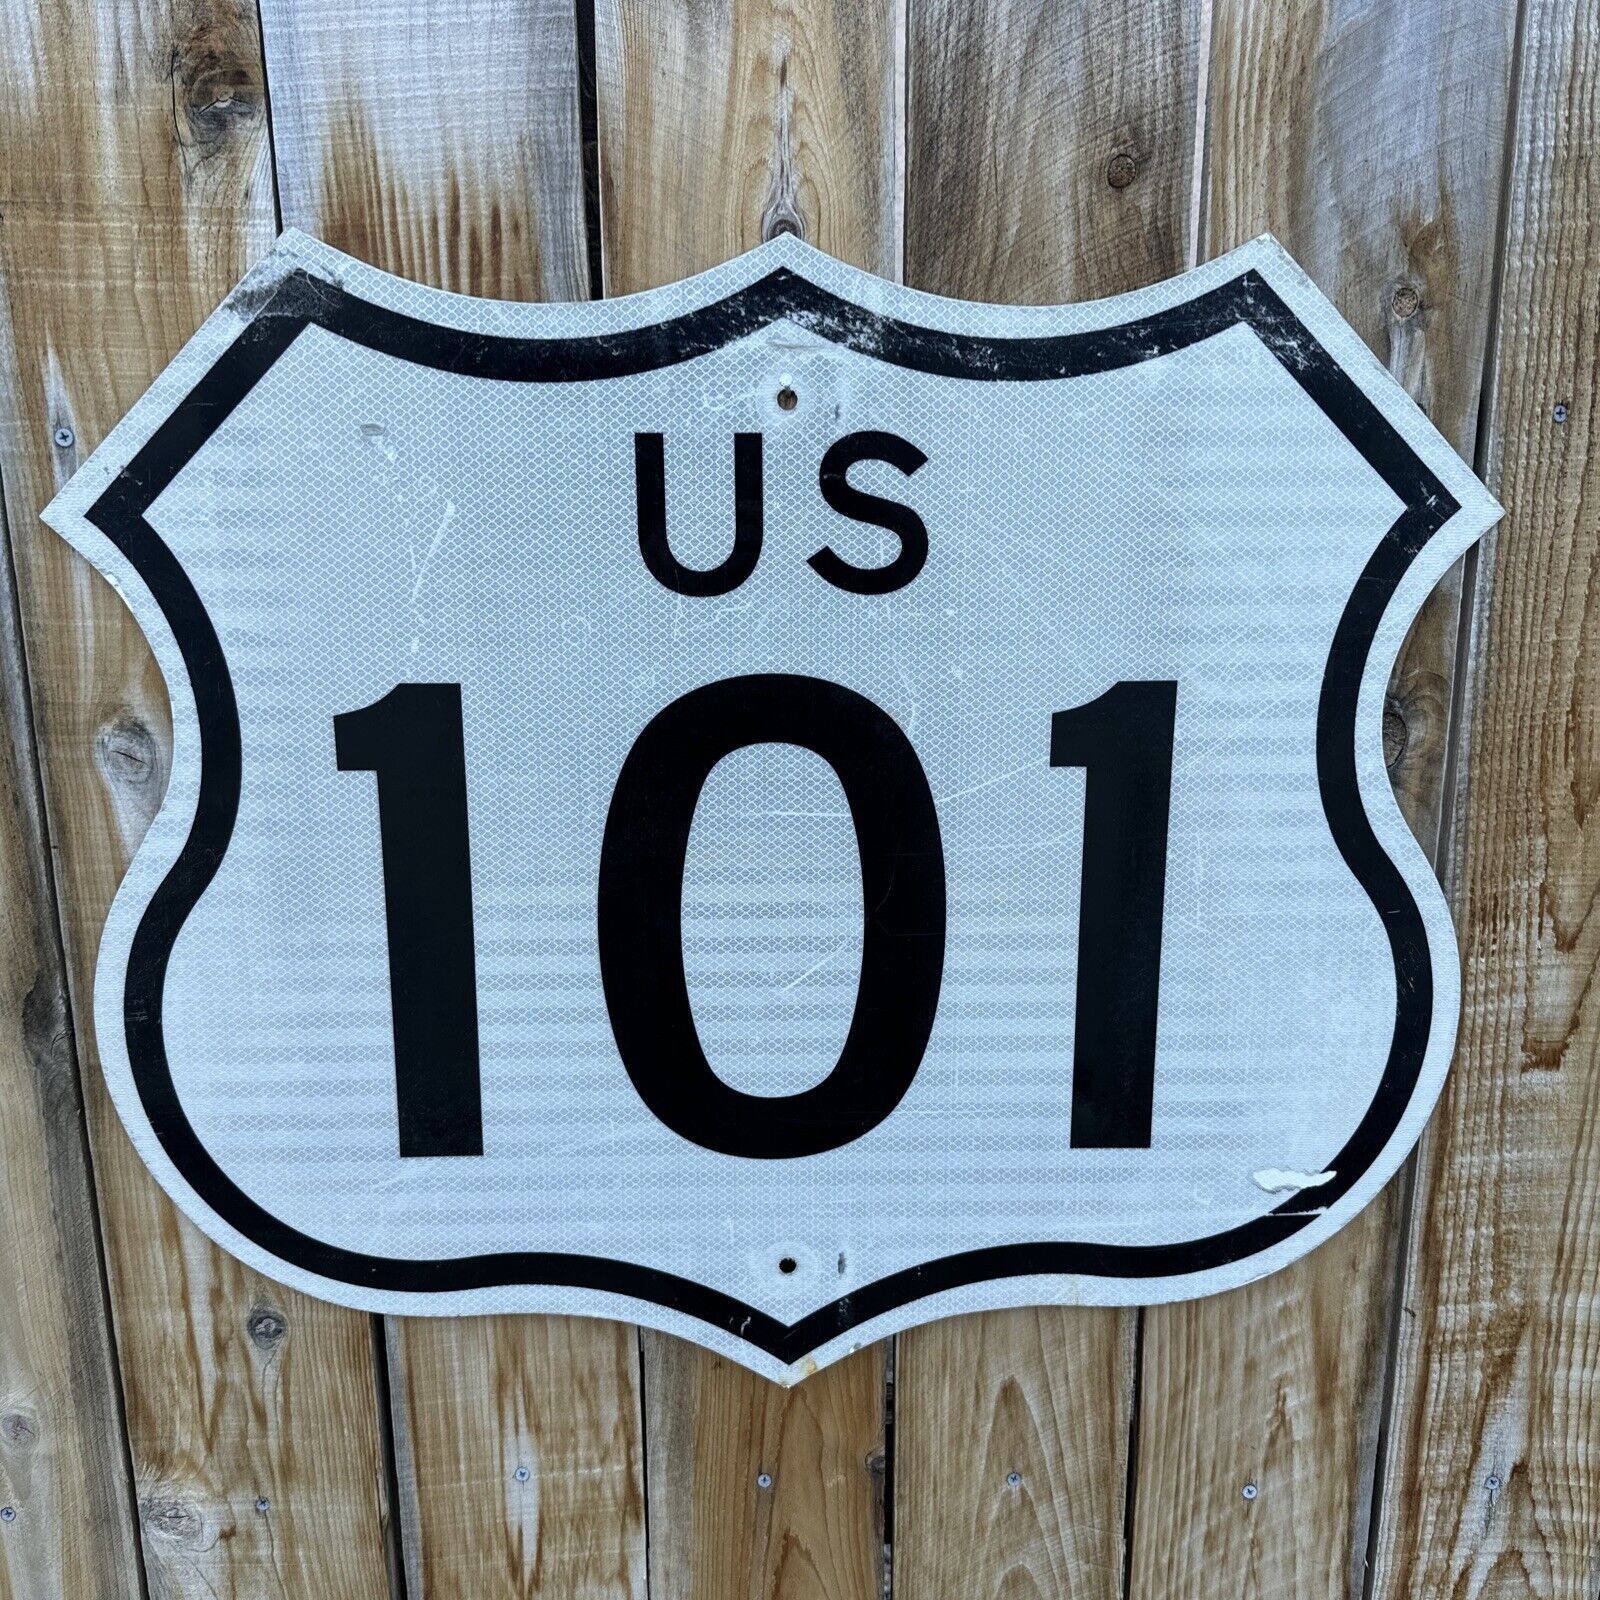 Vintage California US Route 101 Hollywood El Camino Real Authentic Freeway Sign